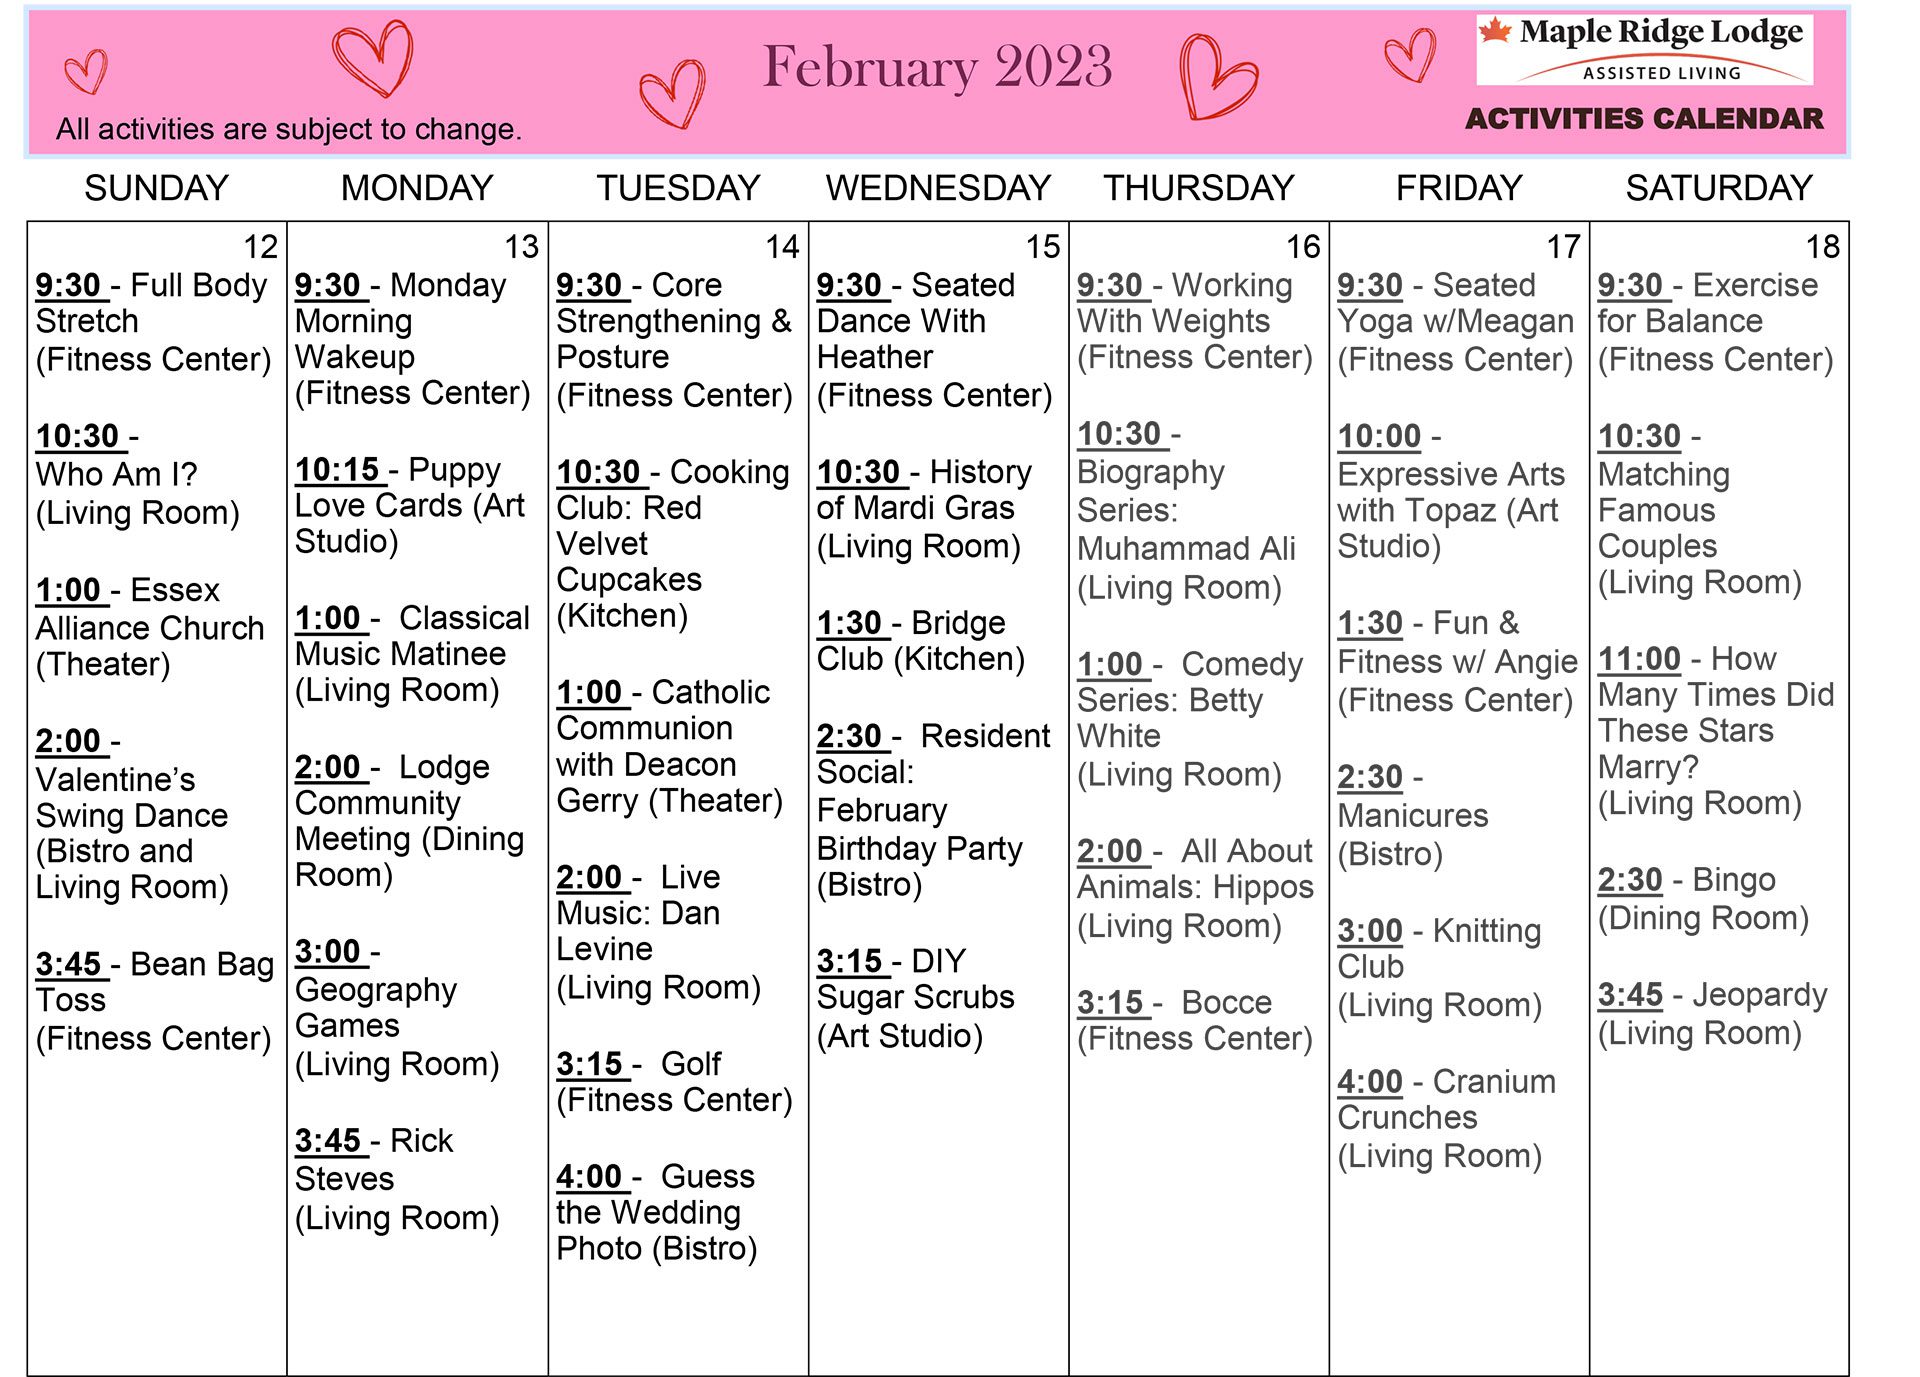 Assisted Living Activities Calendar February 2023